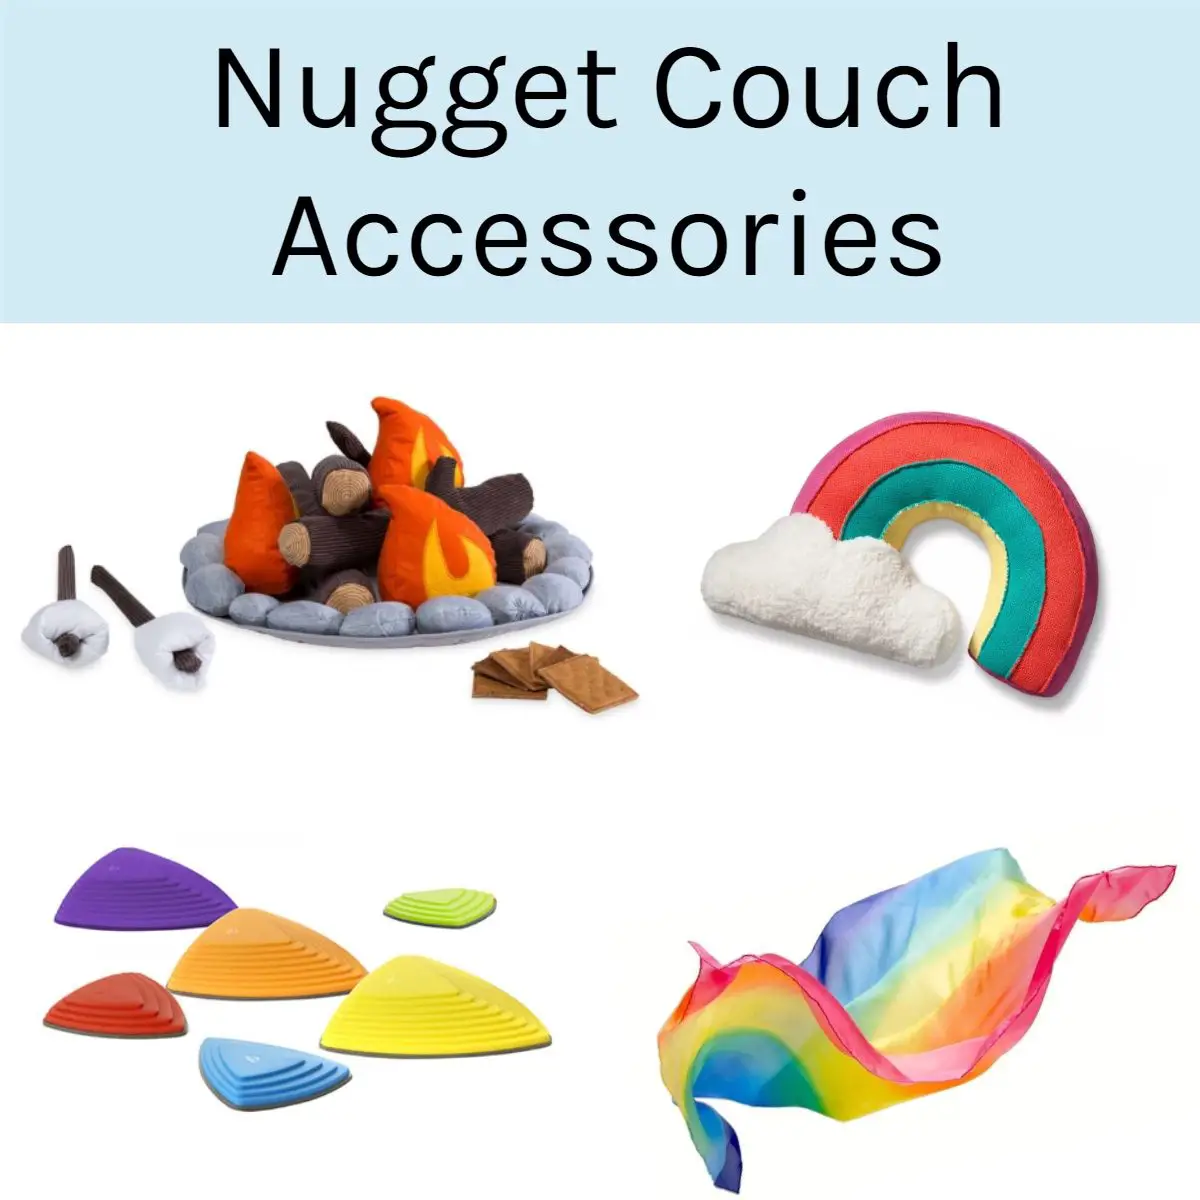 Nugget Couch Accessories